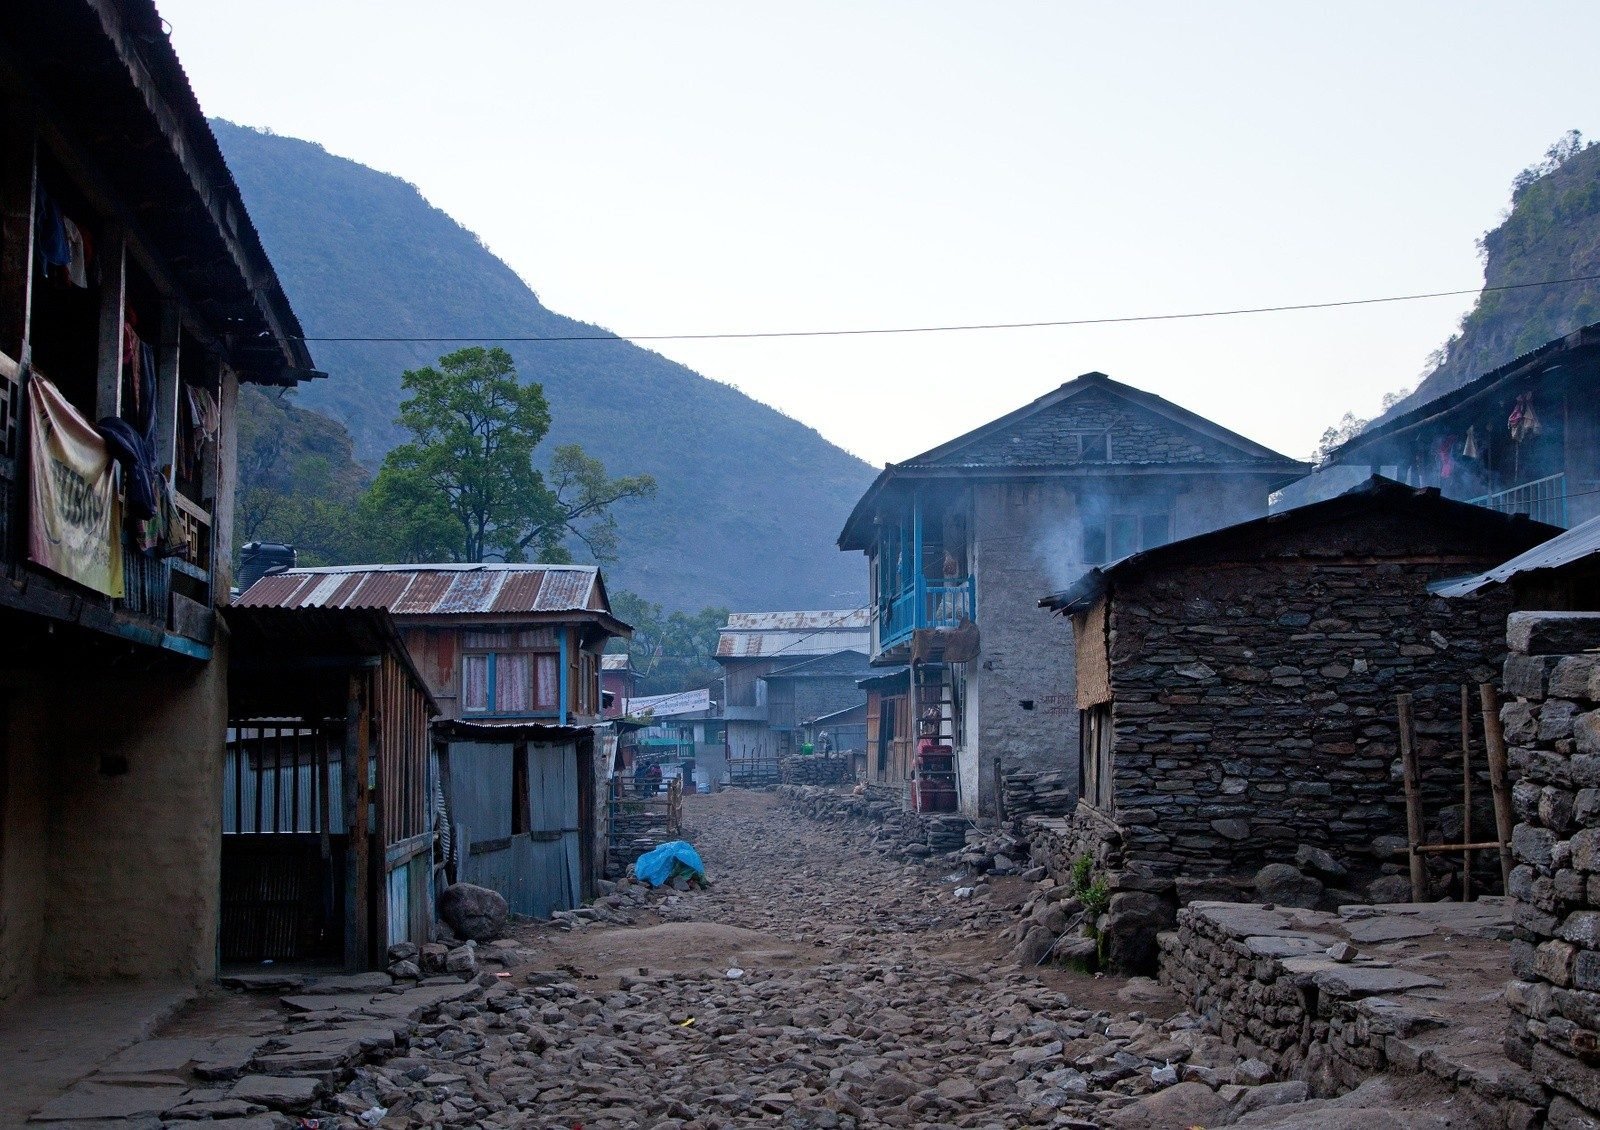 A small village in Nepal's Himalayas